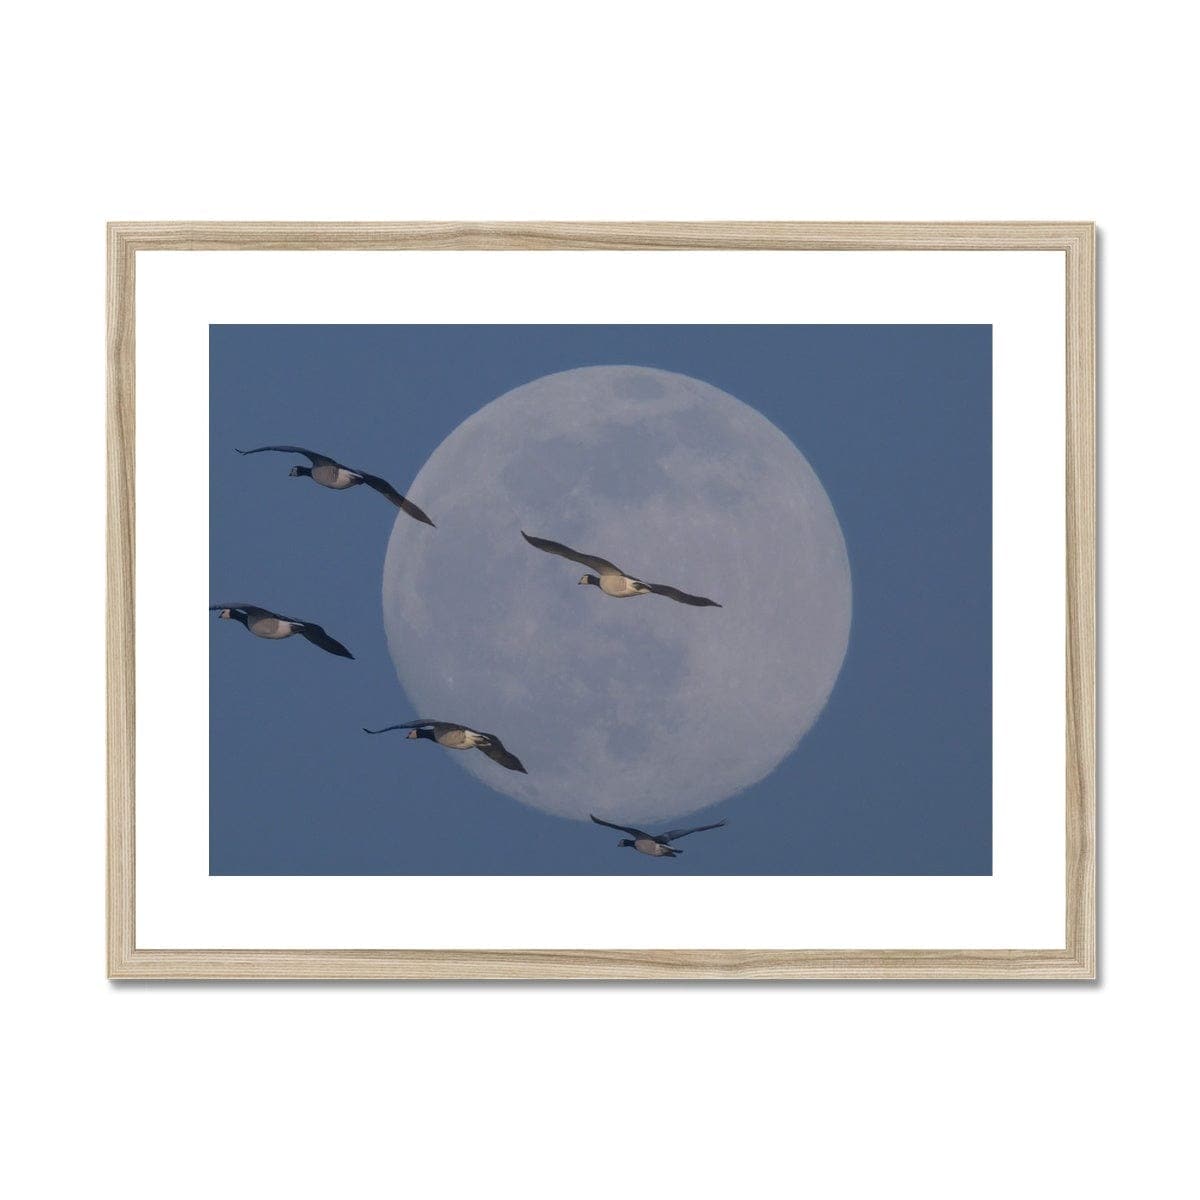 Fly me to the moon Framed & Mounted Print, by Sensus Studio